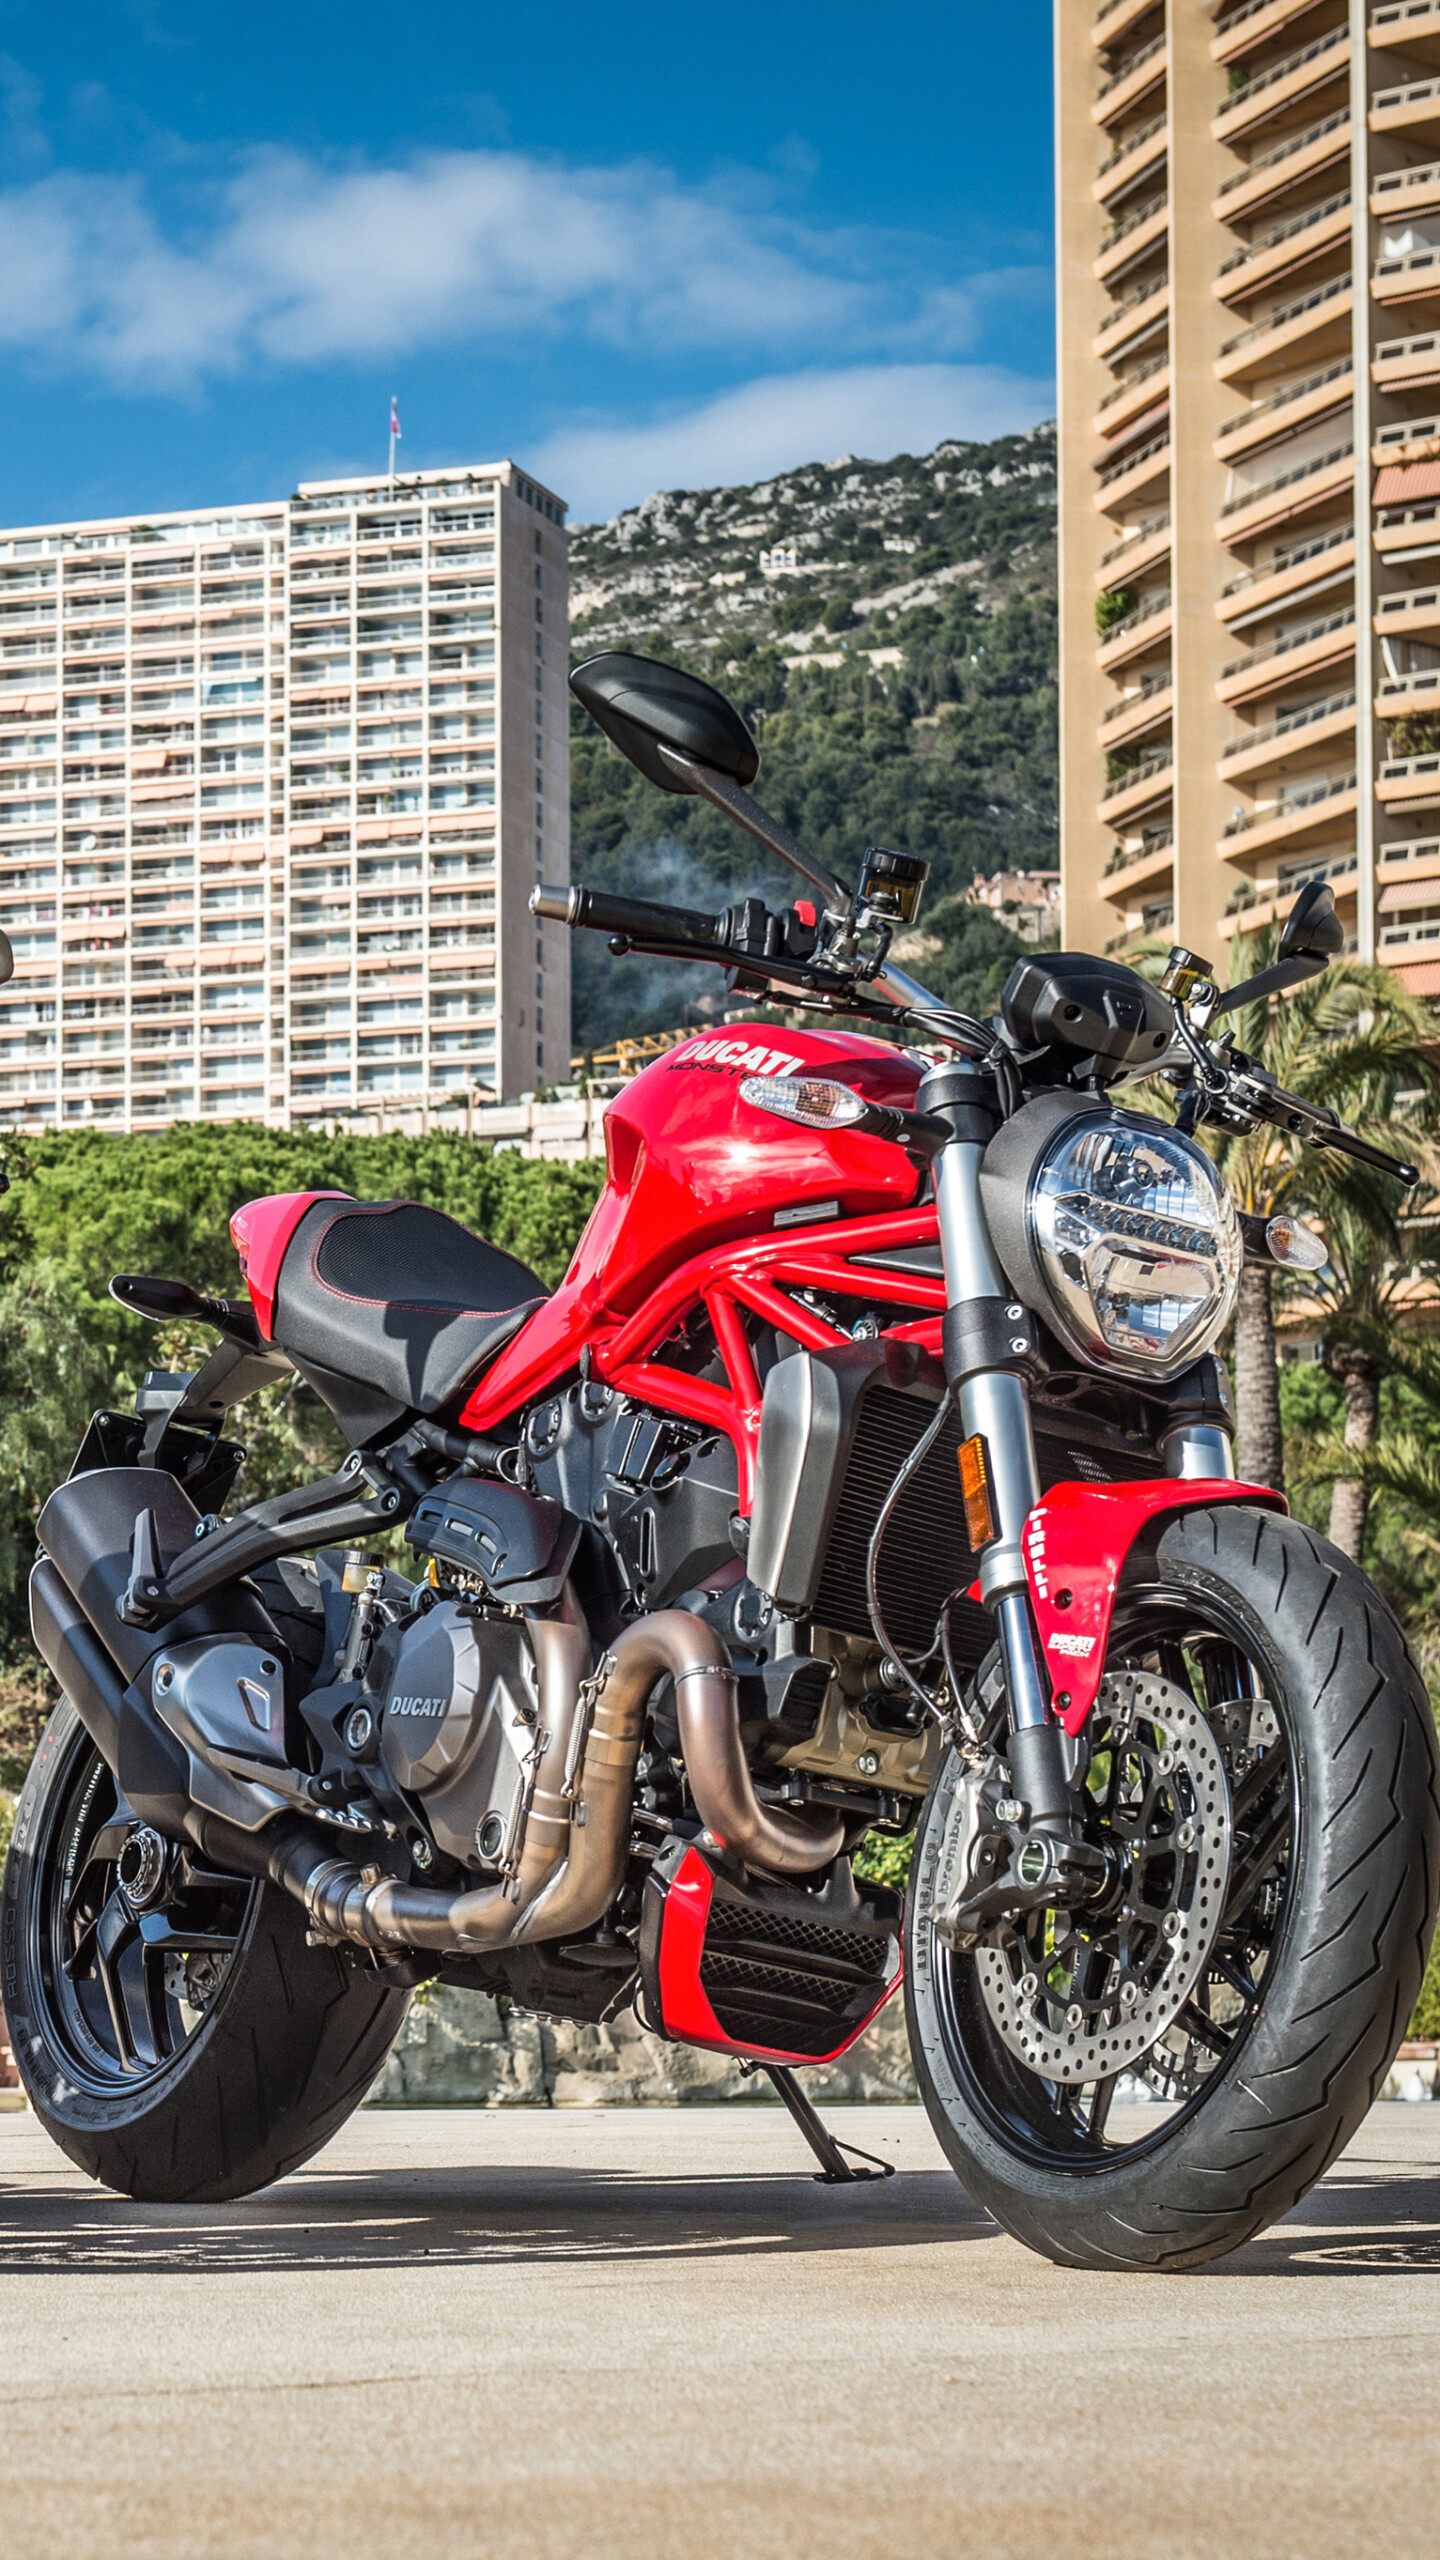 Ducati: Vehicles, Monster model, Produced in Bologna, Italy, since 1993. 1440x2560 HD Background.